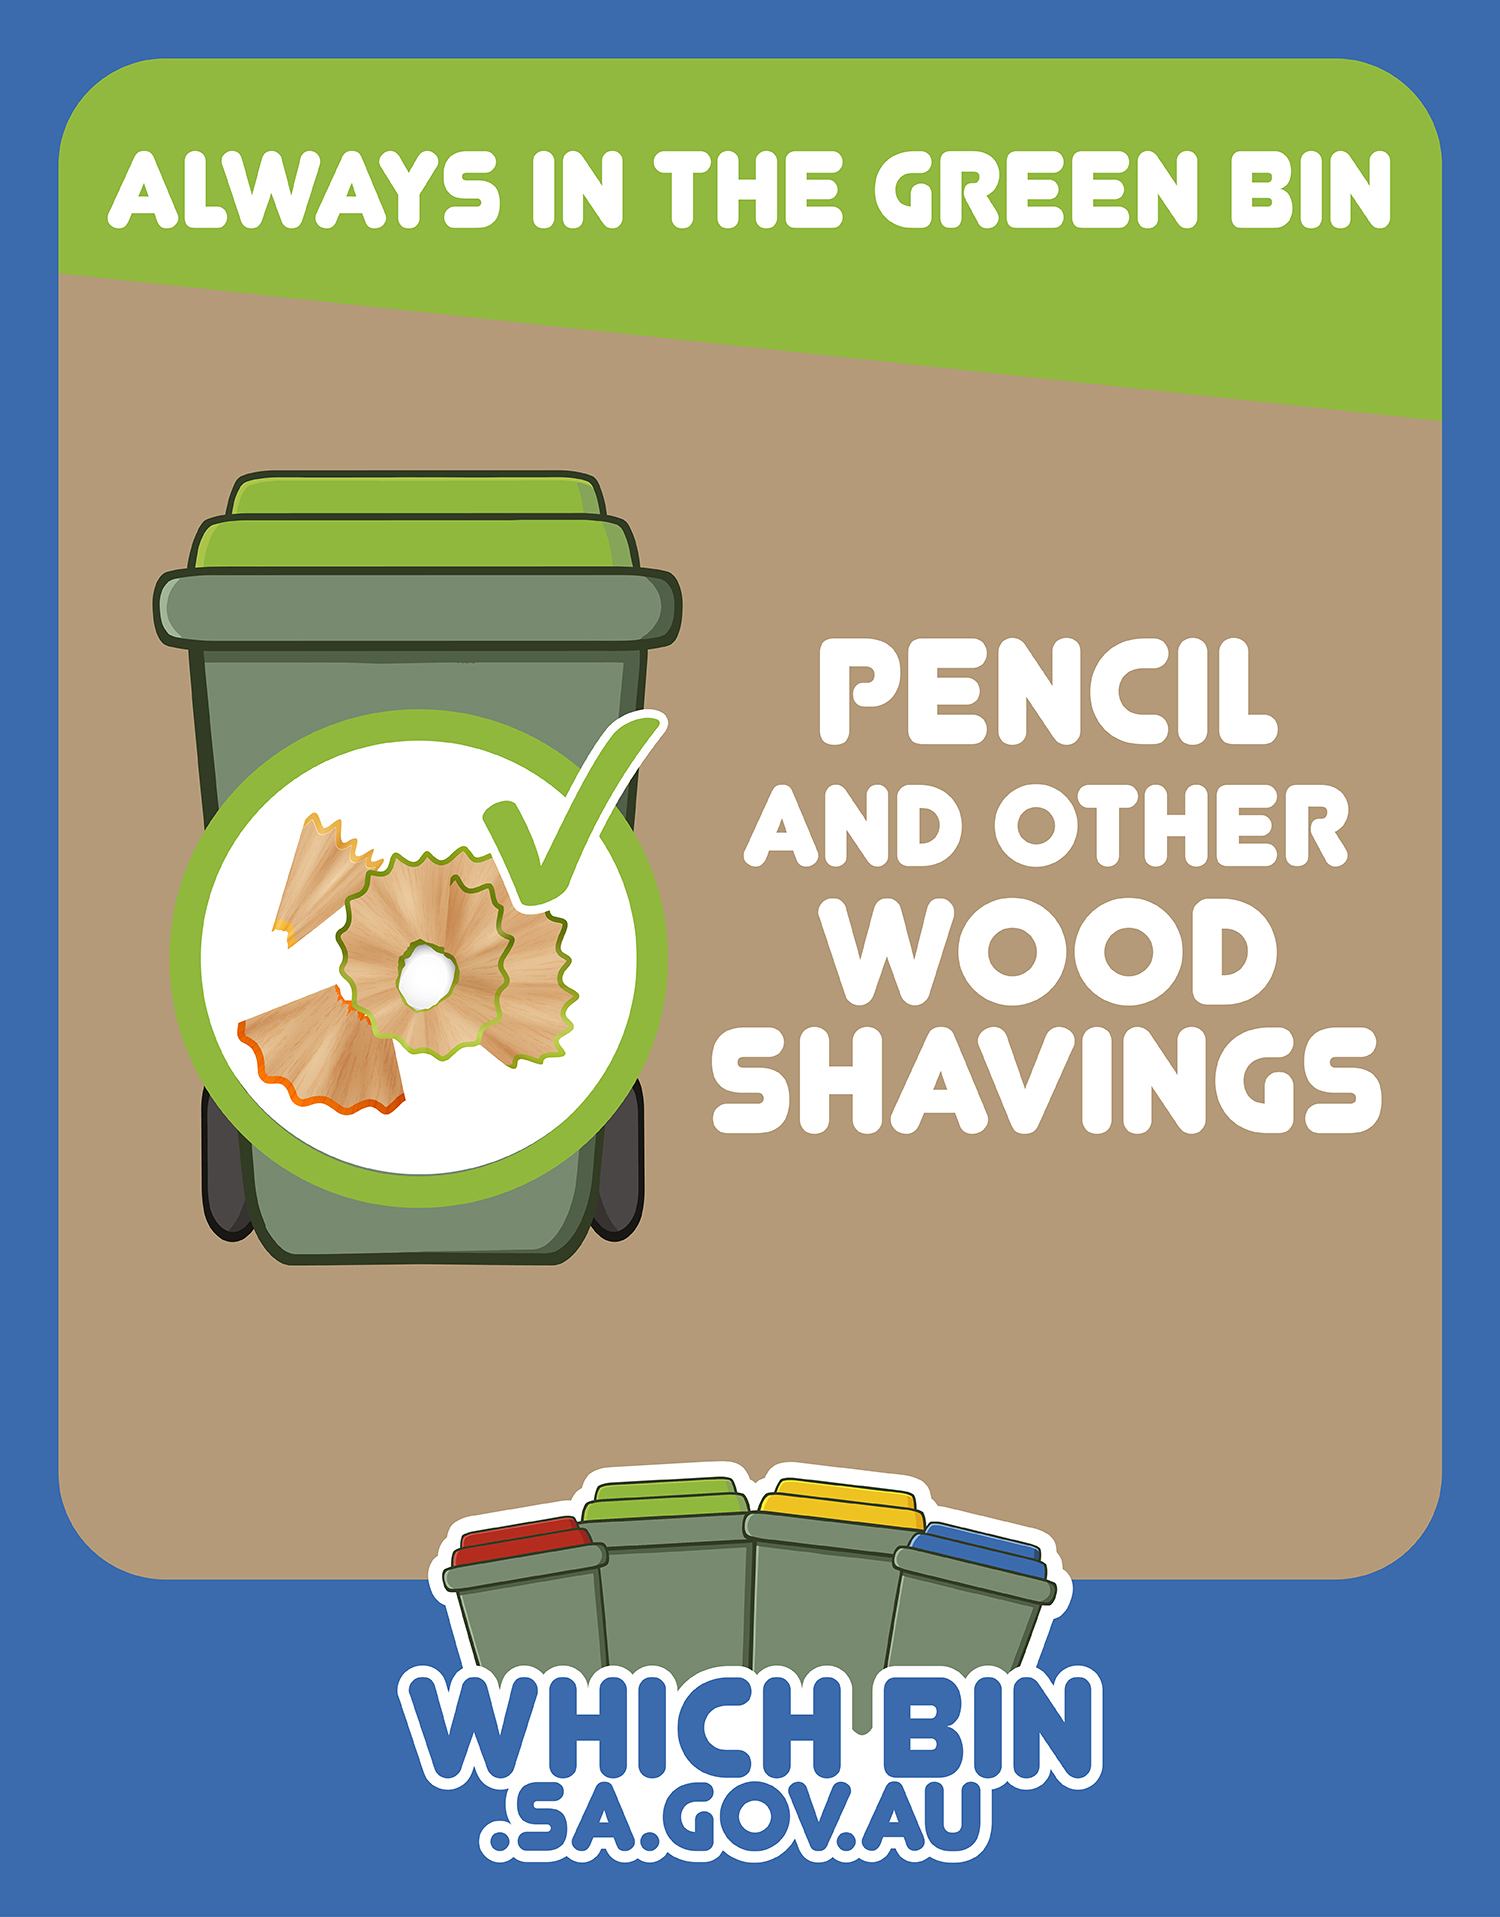 Always in the green bin: pencil and other wood shavings